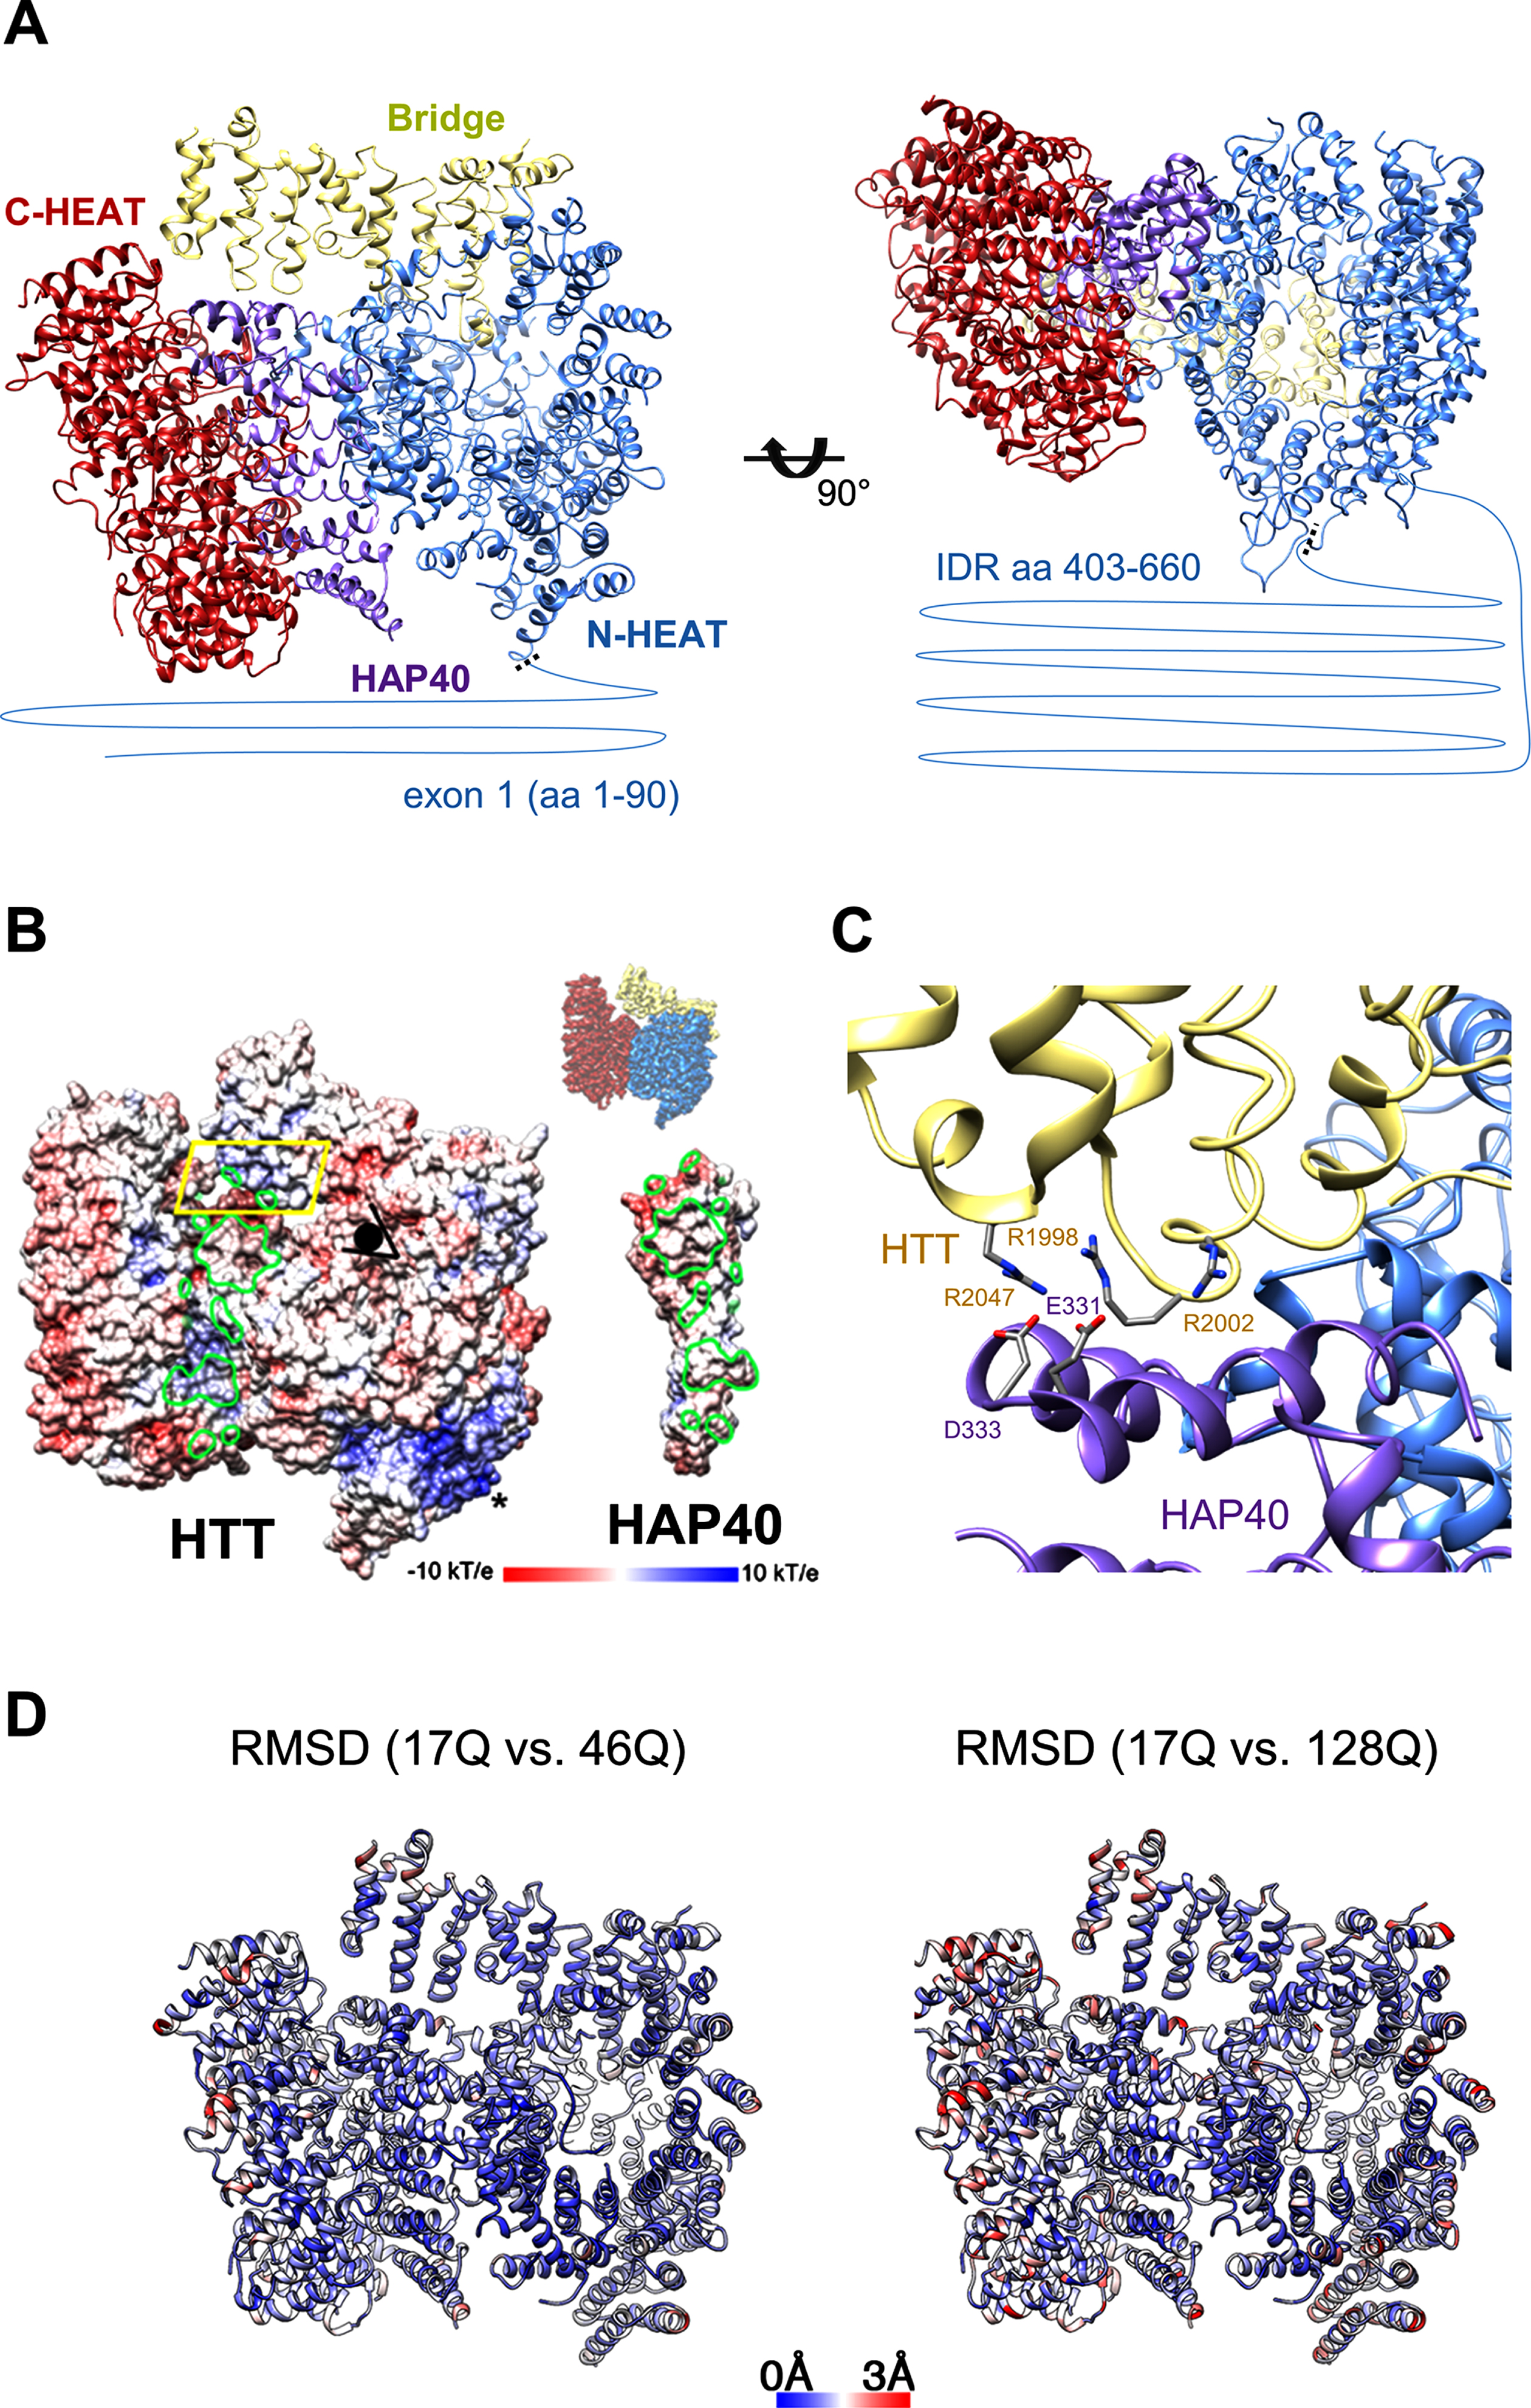 Cryo-EM structure of the HTT-HAP40 complex. A) Atomic model of Q17 HTT-HAP40 (PDB 6EZ8; [22]) in ribbon representation. HTT domains are shown as follows: N-HEAT (residues 97-1,690) in blue, Bridge (residues 1,691-2,097) in yellow and C-HEAT (residues 2,098-3,104) in maroon. HAP40 (residues 42-364) is shown in purple. The unstructured regions comprising residues 1-96 of exon 1 fragment and residues 409-666 are shown approximately to scale as lines. B) Electrostatic surface potentials of Q17 HTT and HAP40 (PDB 6EZ8; [22]) in “open book” view. Green contours mark the interaction areas between HTT and HAP40, dominated by hydrophobic interactions. A conserved charge clamp between the HTT Bridge domain and the HAP40 C-terminus is outlined in yellow. An eye indicates the perspective of the charge clamp visualized in C. A positively charged surface on the HTT N-term domain is marked by an asterisk. C) Charge clamp between HTT and HAP40 (PDB 6EZ8; [22]) in ribbon representation. Residues participating in the electrostatic interaction are displayed and shown as sticks. D) Atomic models of Q46 HTT-HAP40 (PDB 7DXJ; [23]; left) and Q128 HTT-HAP40 (PDB 7DXK; [22]; right) in ribbon representation. The colour code shows the root-mean-square deviation with Q17 HTT-HAP40 (PDB 6EZ8; [22]), displaying minimal (<3 Å) differences between the models. Numbering in panels A and C correspond to that of reference Q23-HTT protein NP_002102.4.